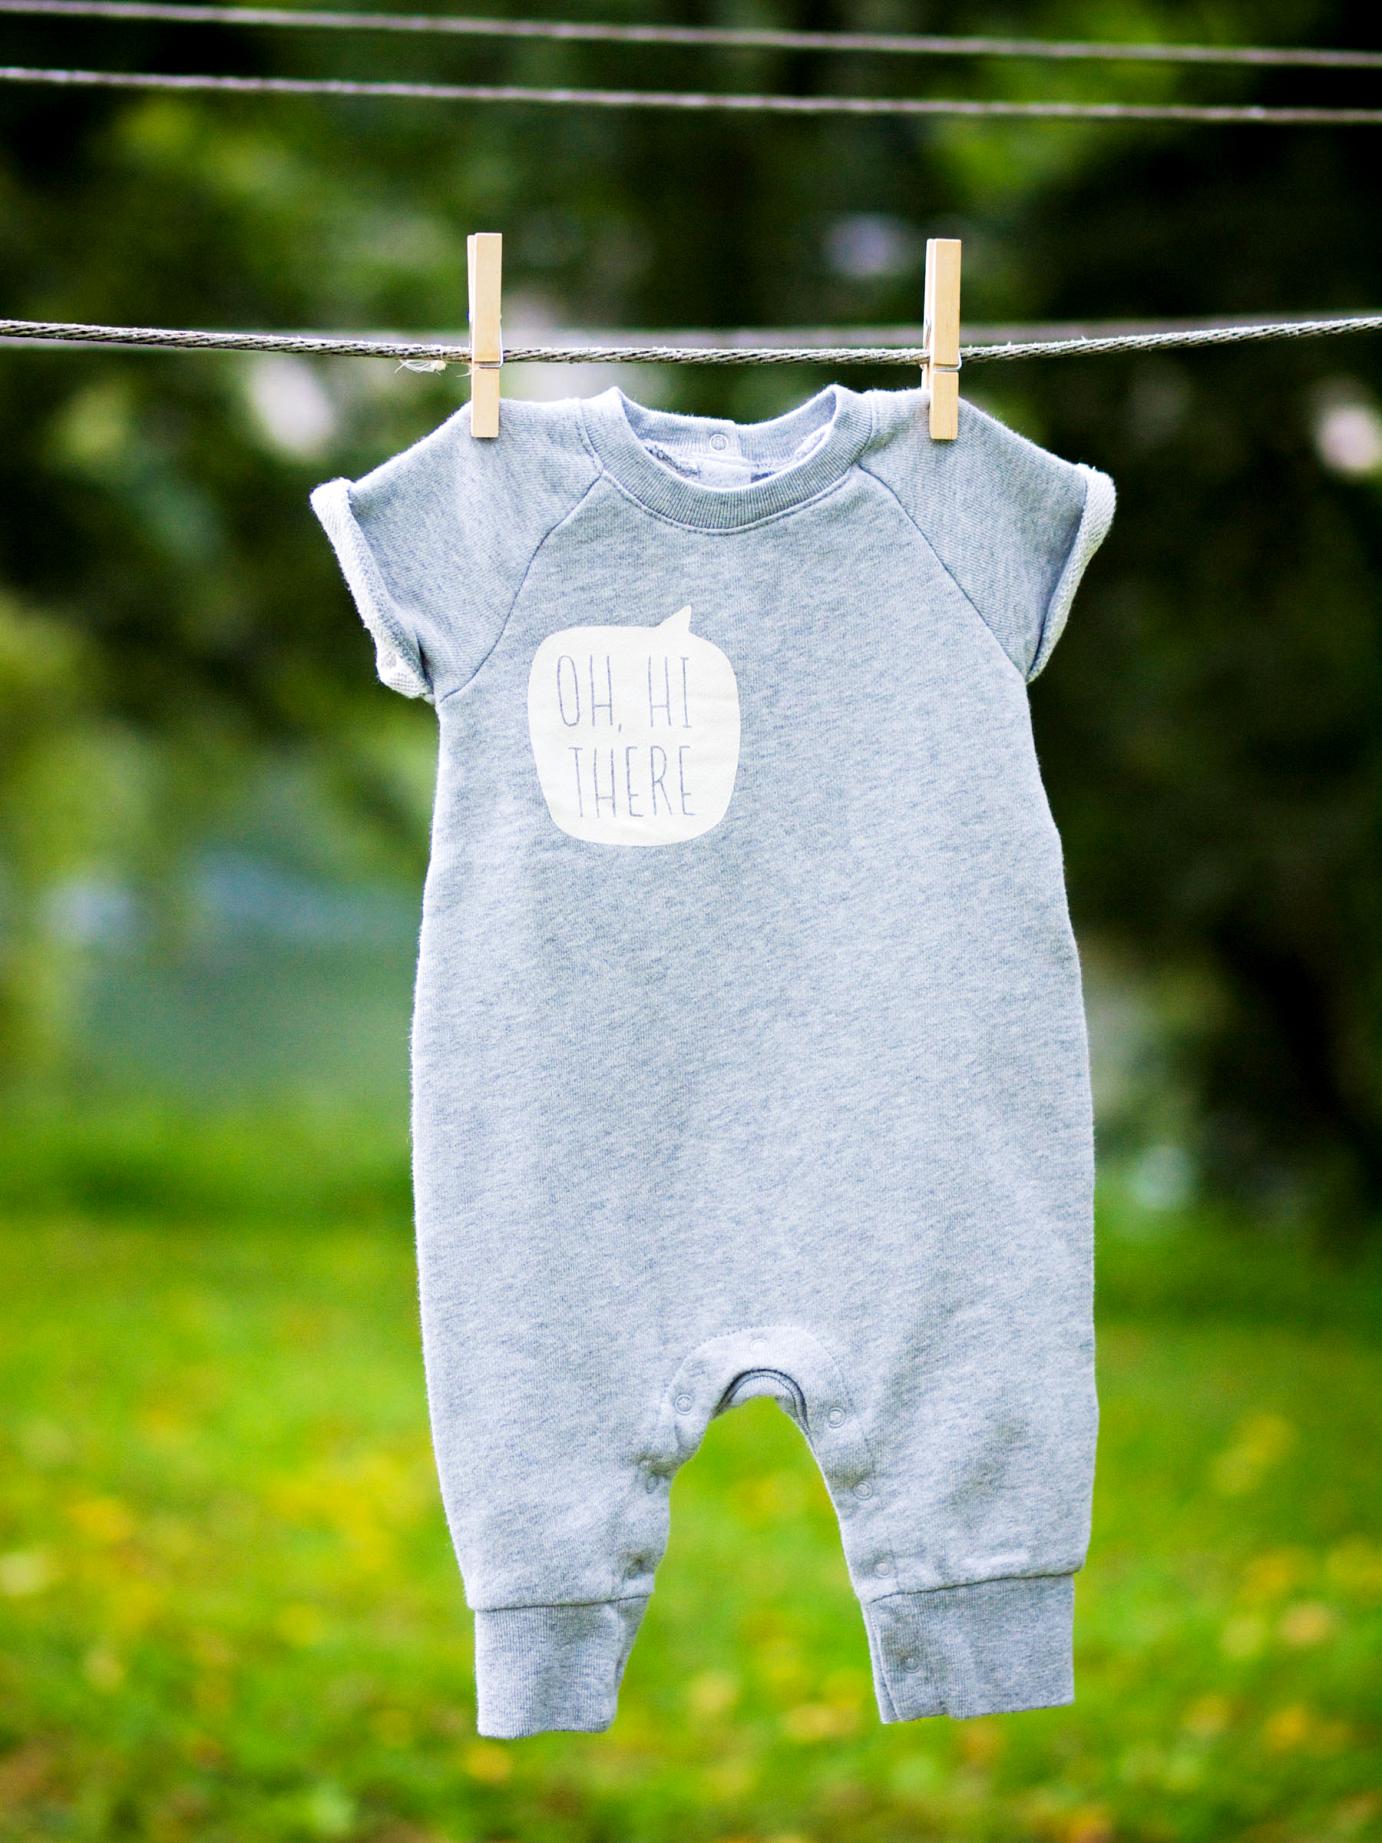 bittersweet colours, baby news, baby announcement, Gap Kids, baby clothing, march 2015, new chapter, love